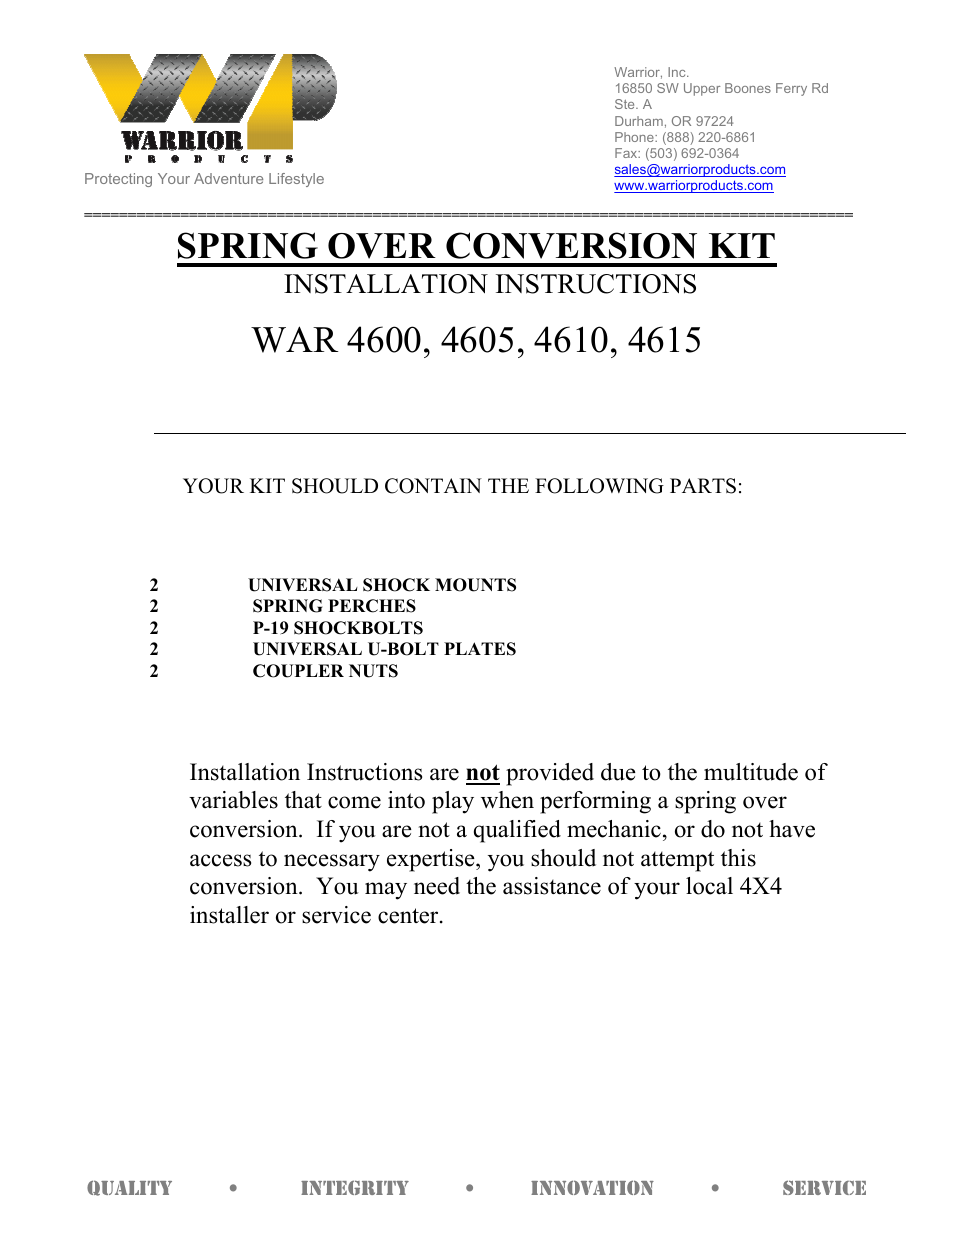 4615 SPRING OVER CONVERSION KIT (Universal)